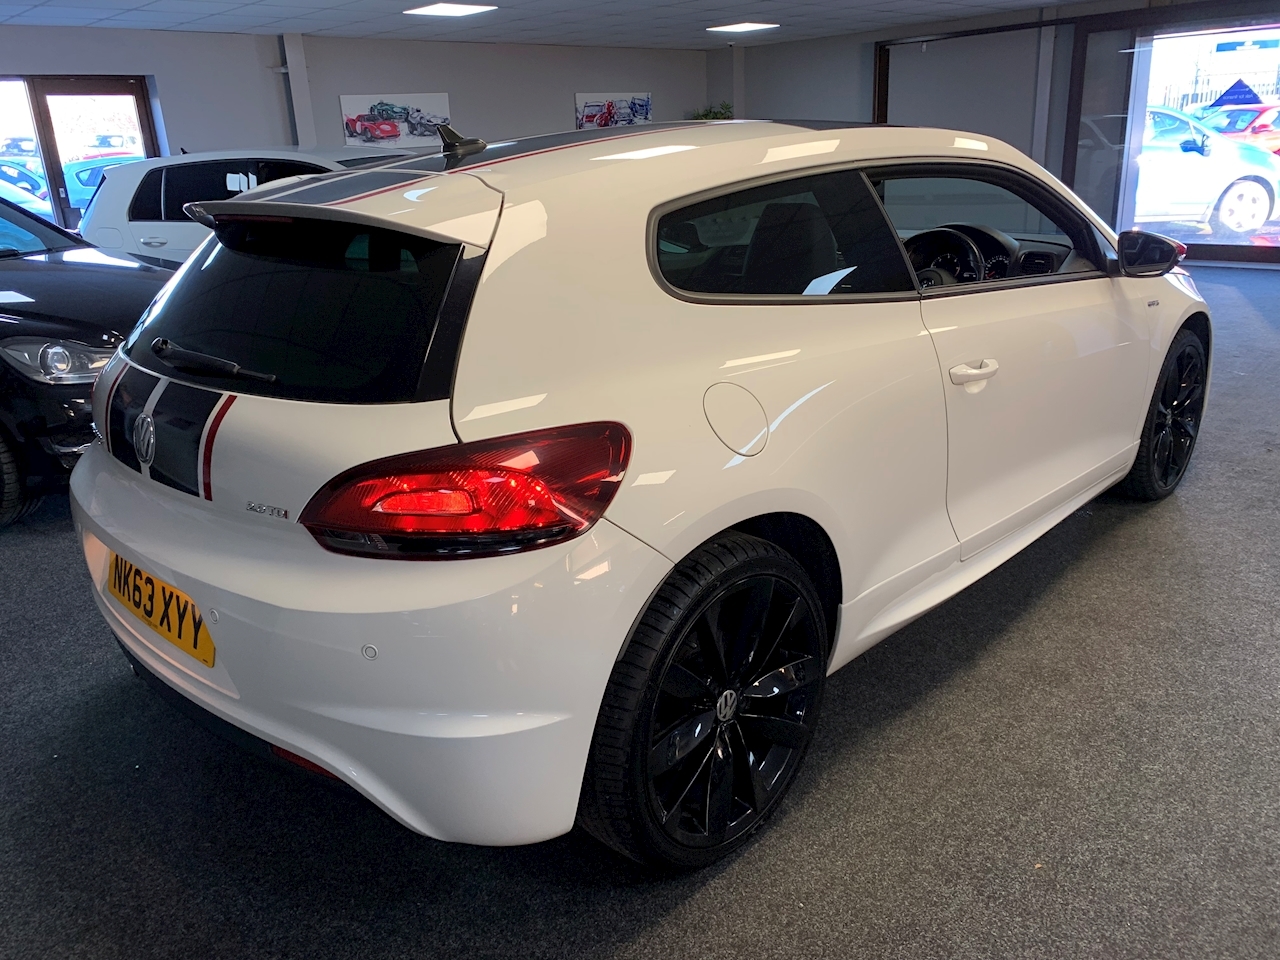 Scirocco Gts Tdi Coupe 2.0 Manual Diesel